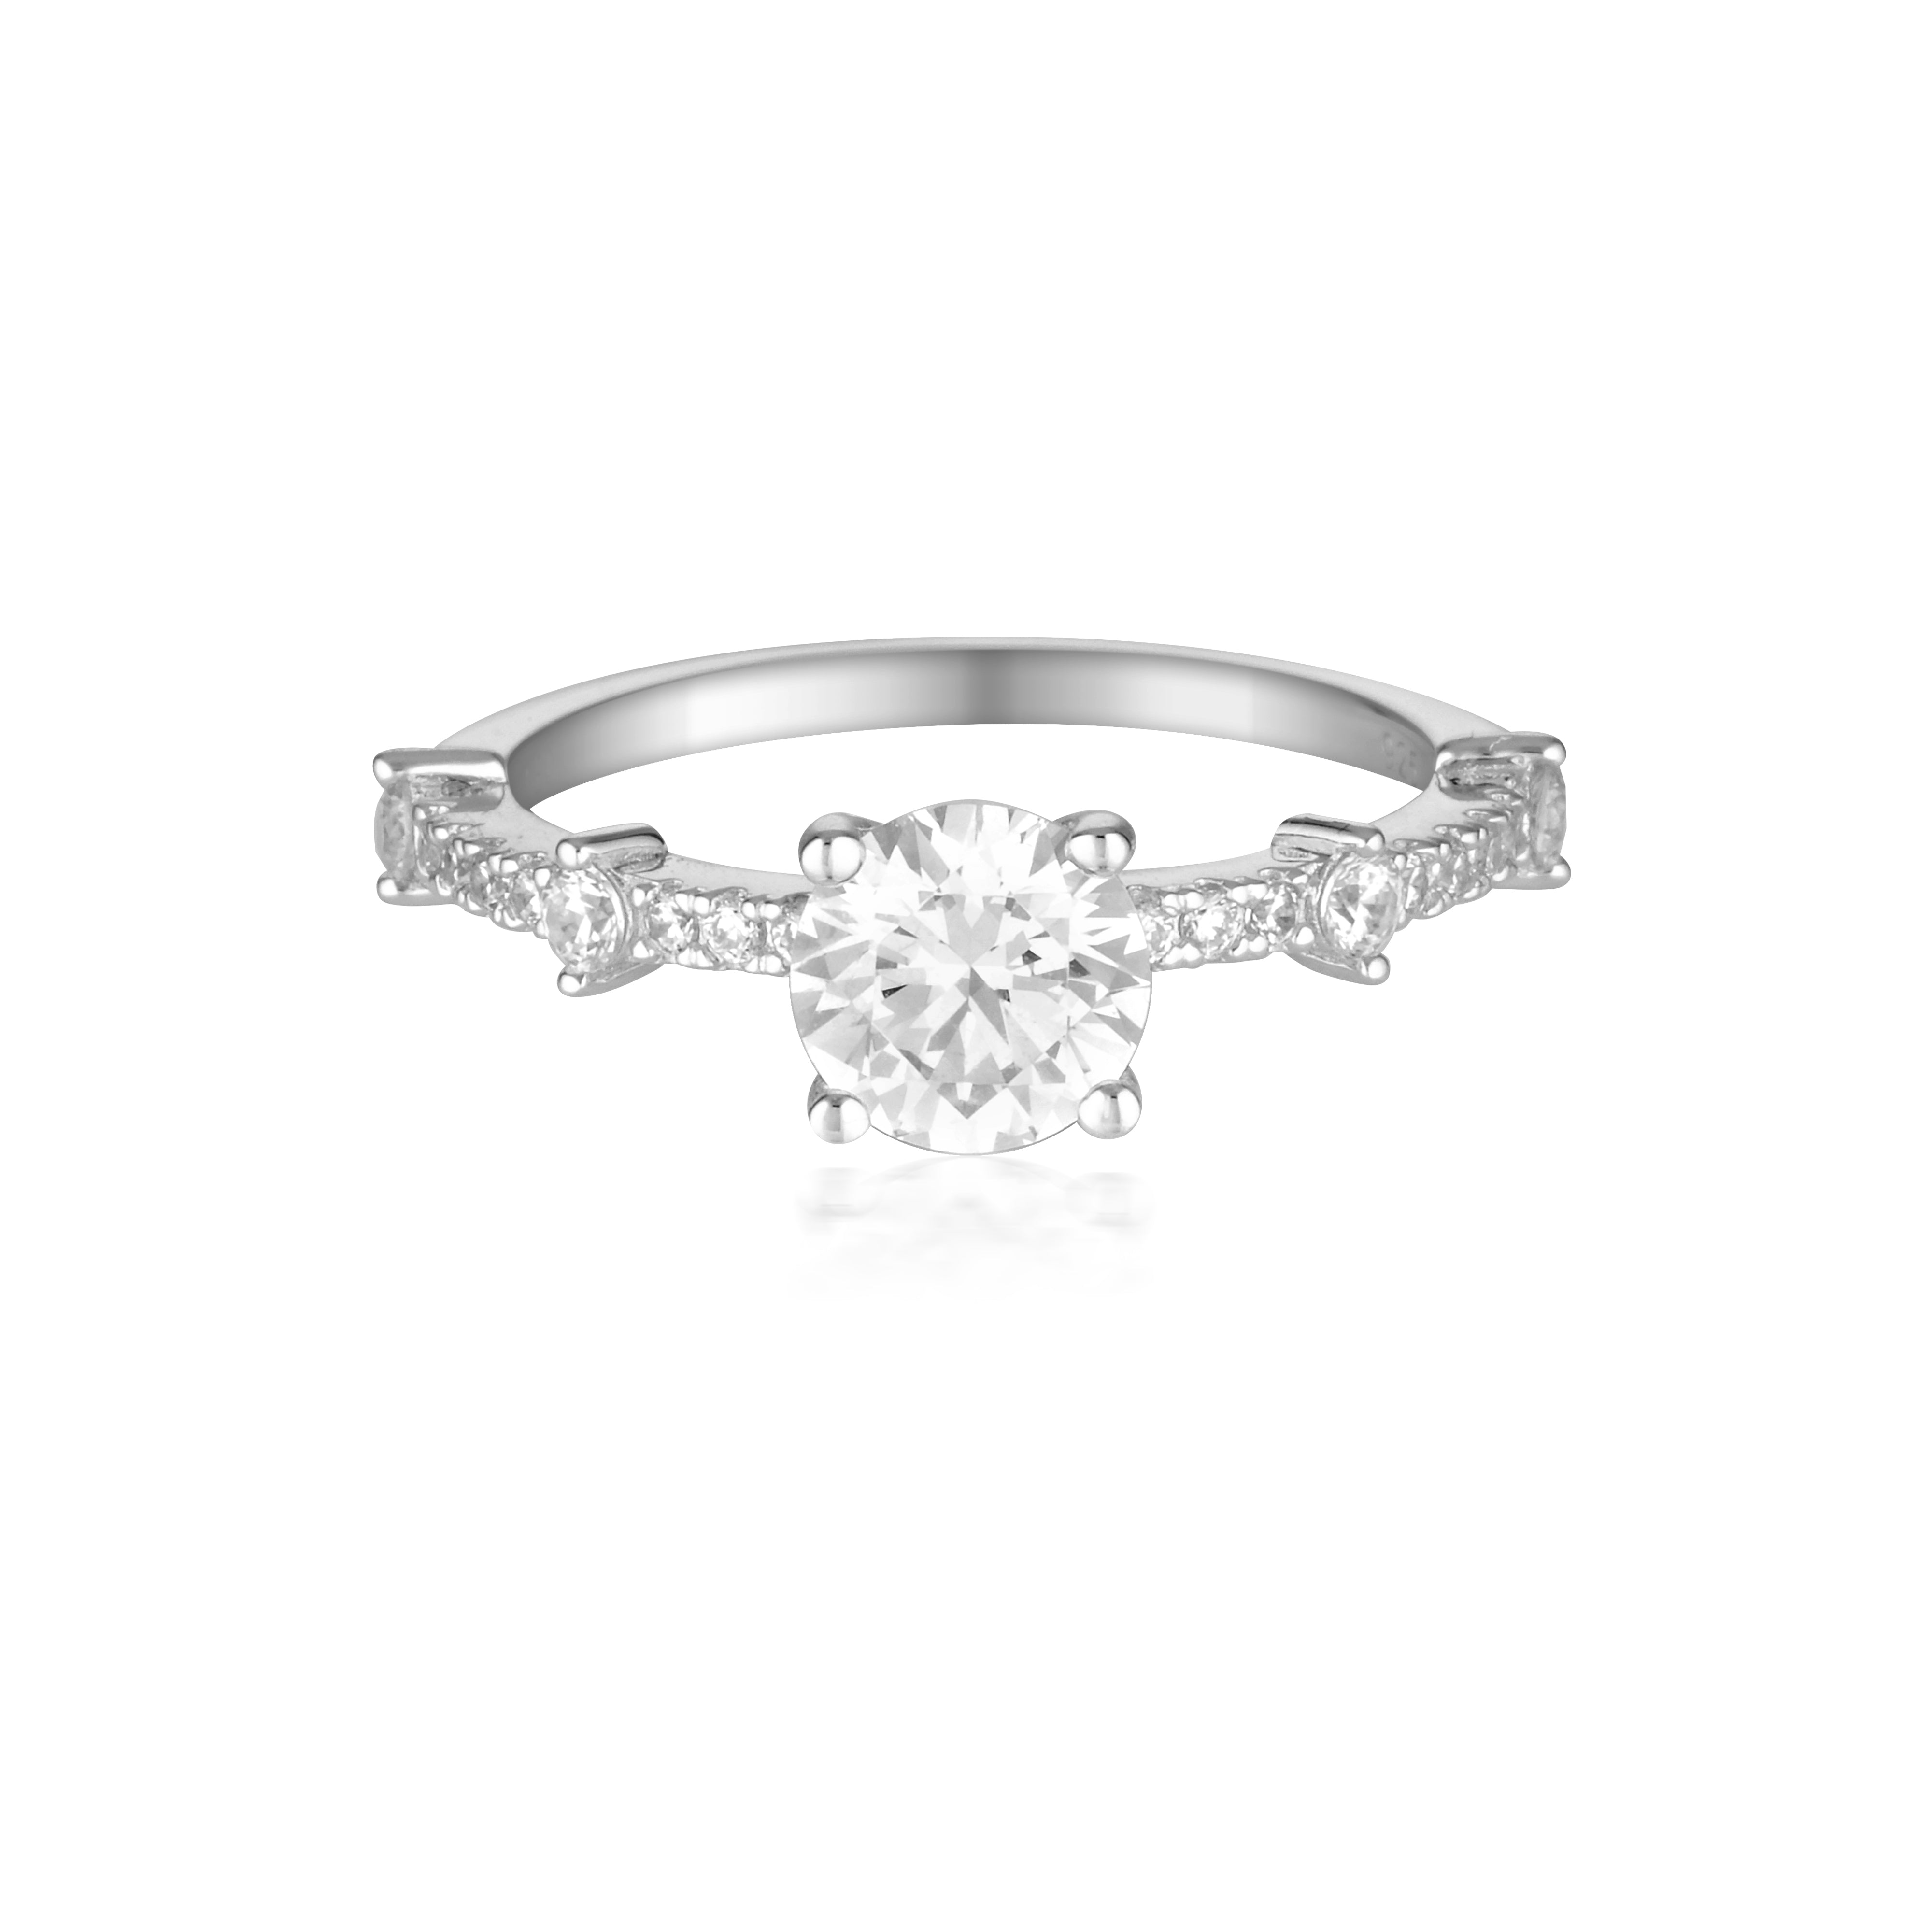 RED CARPET GALA SOLITAIRE RING SILVER